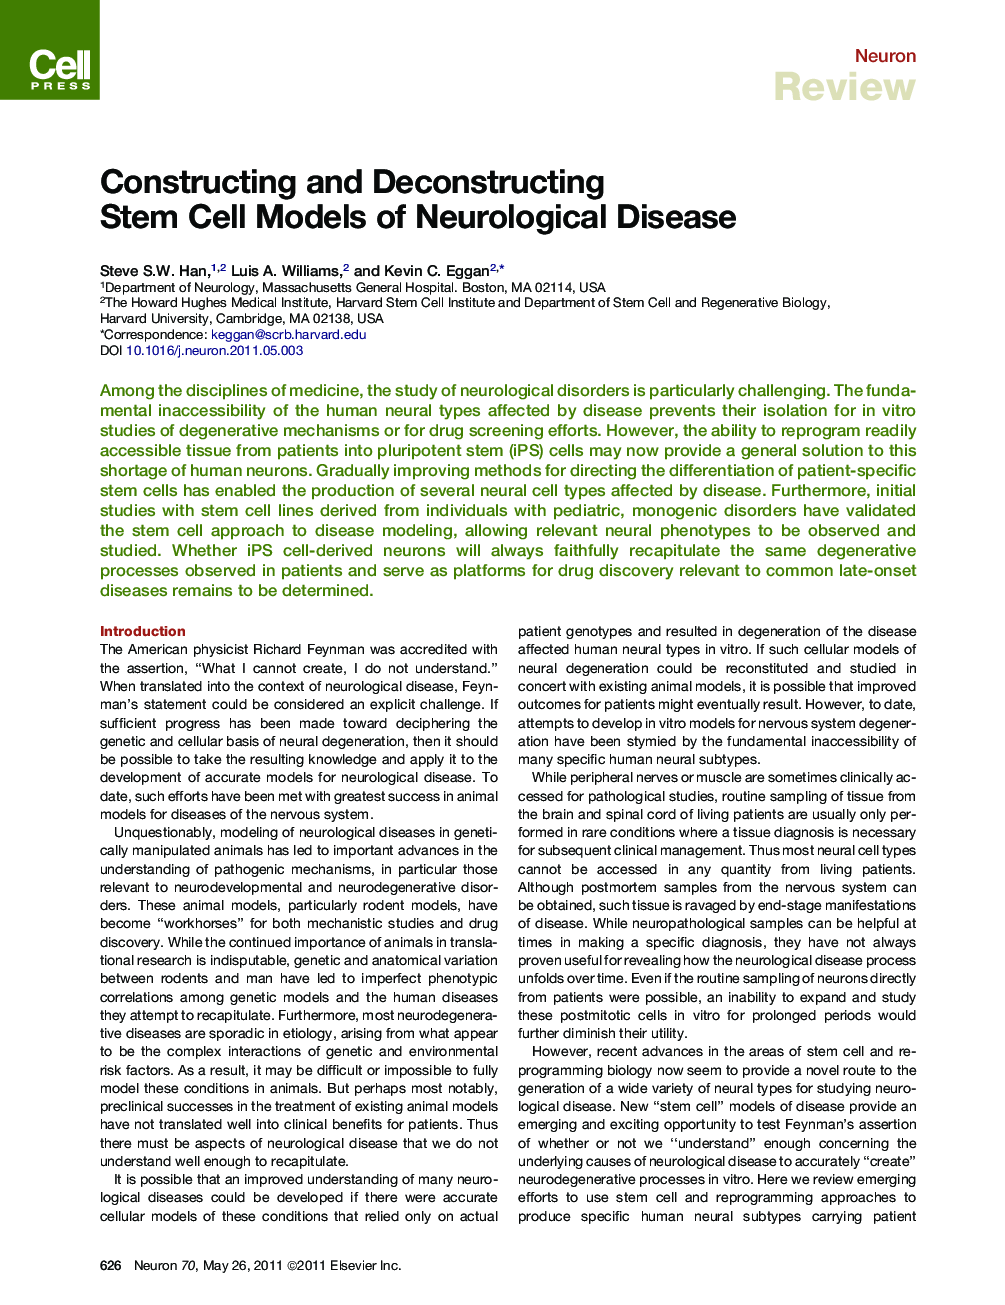 Constructing and Deconstructing Stem Cell Models of Neurological Disease